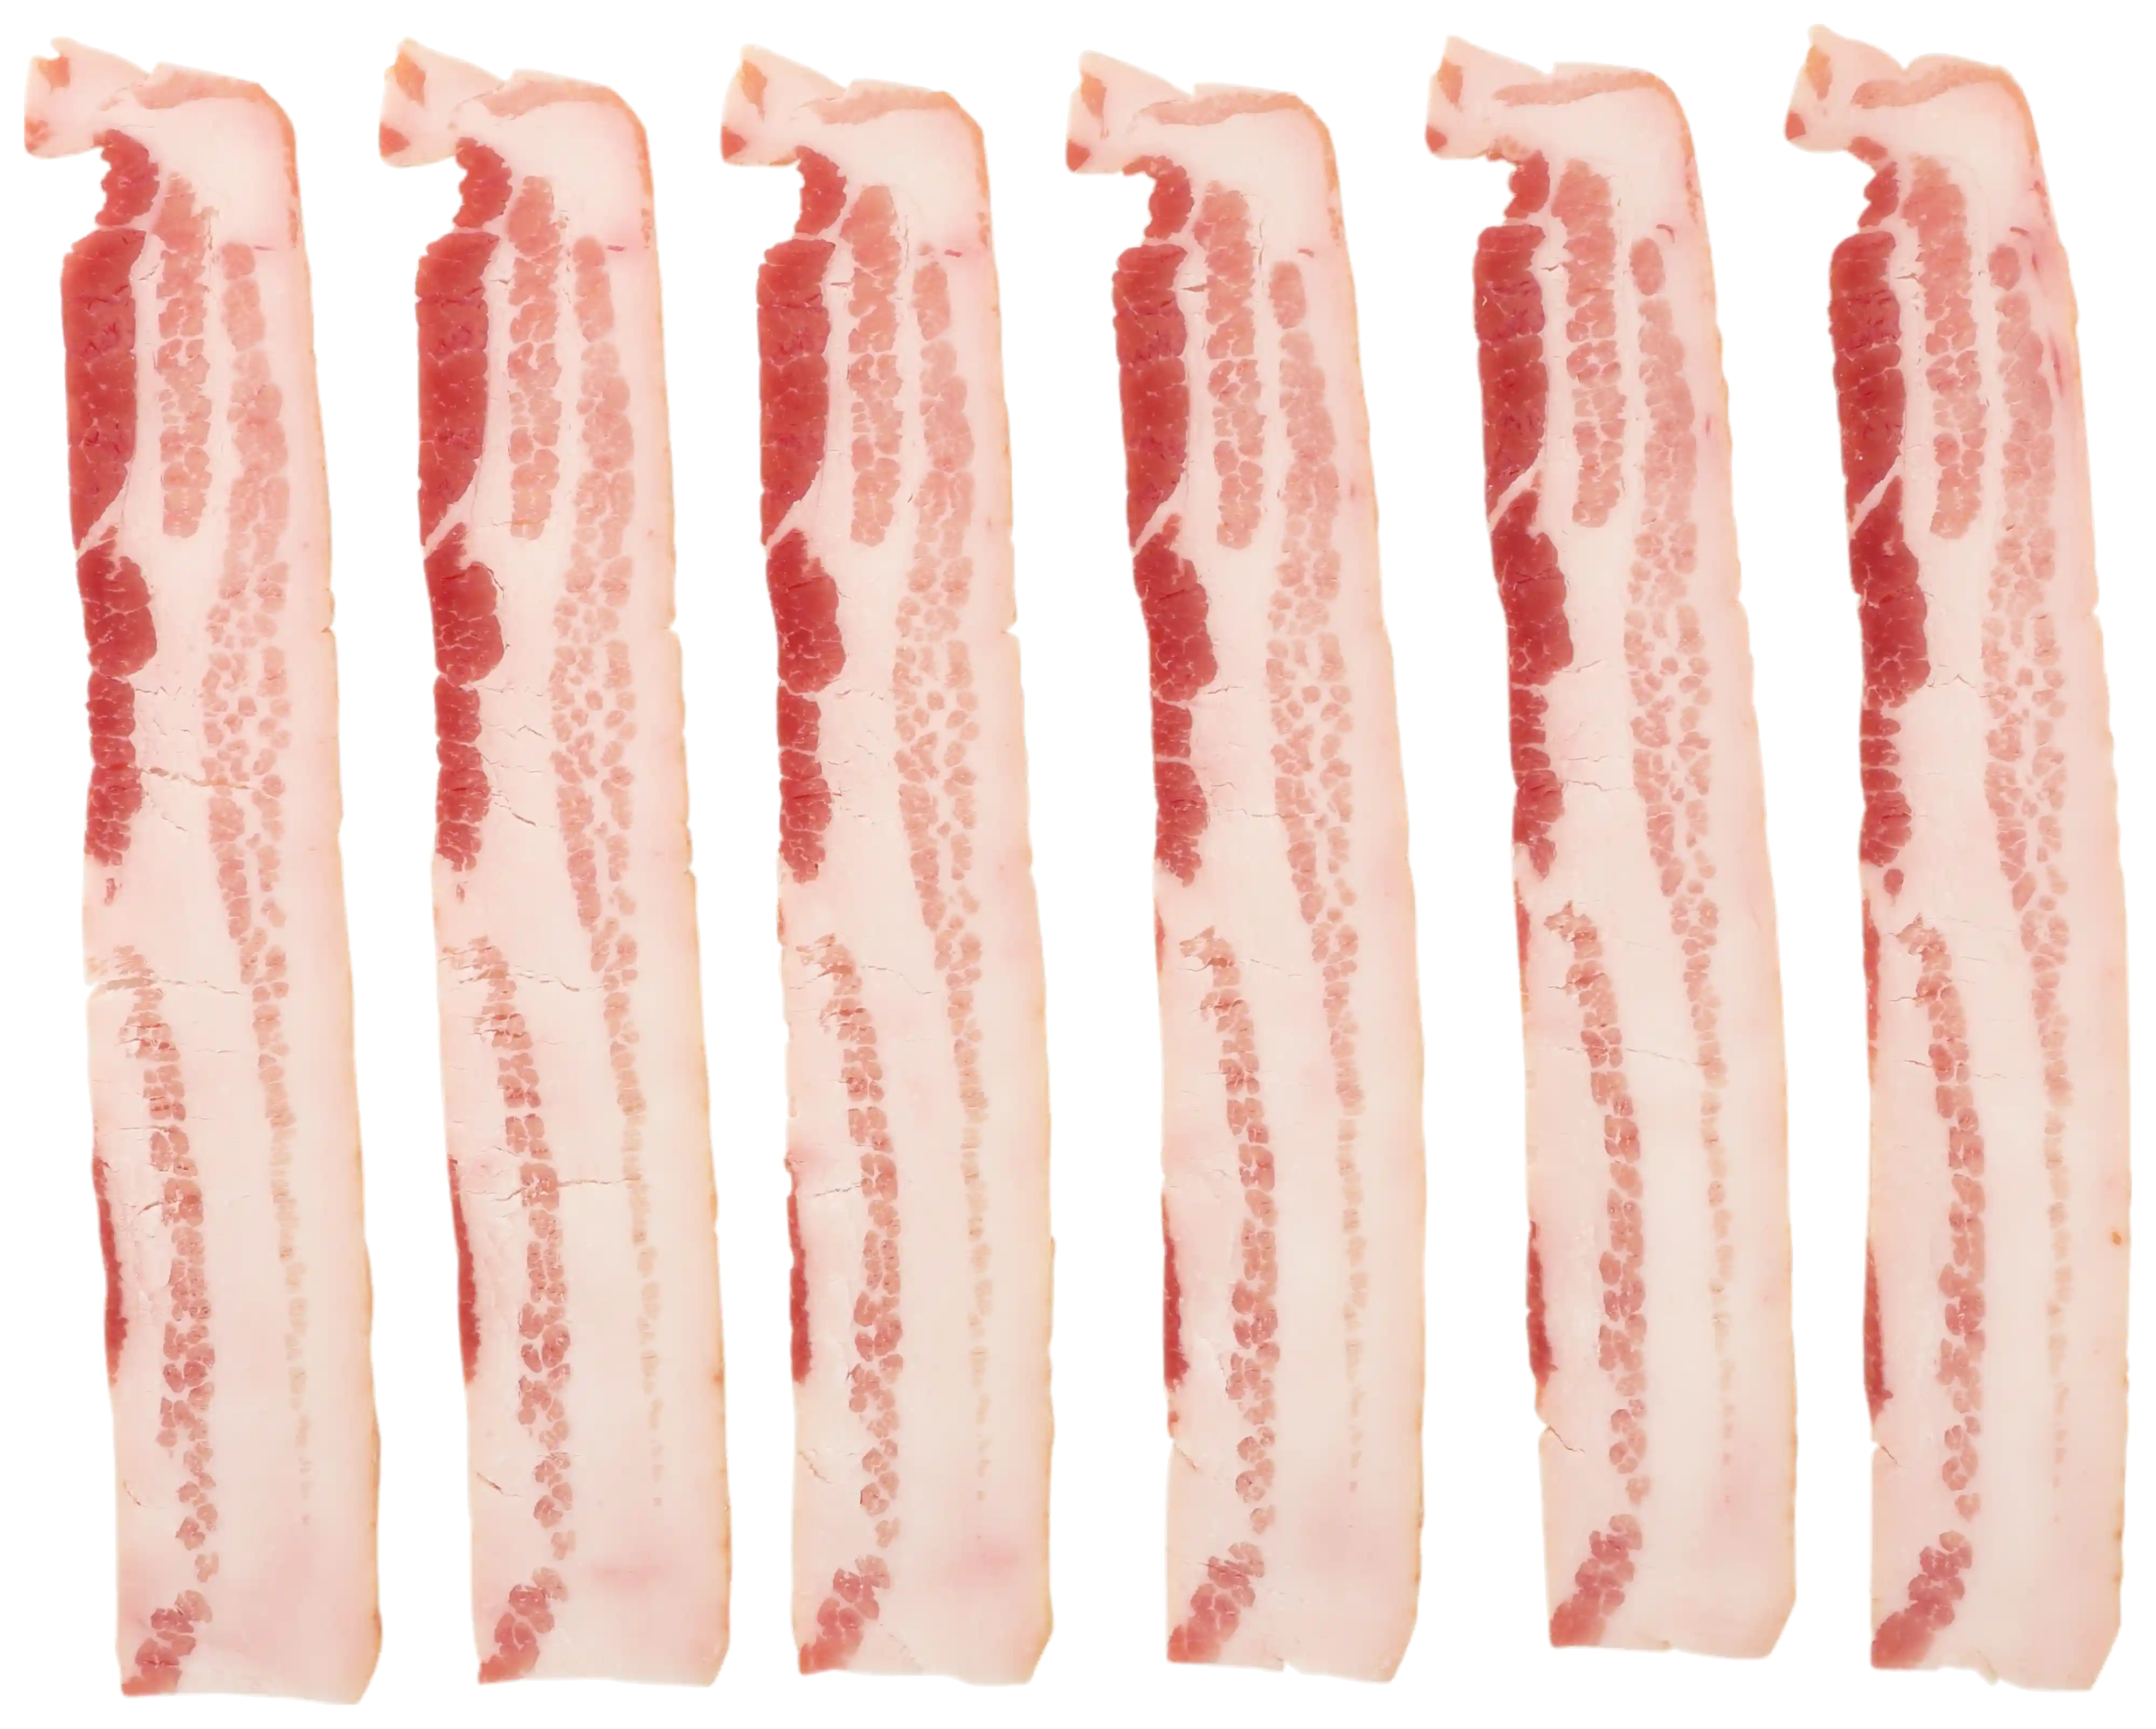 Wright® Brand Naturally Hickory Smoked Extra Extra Thick Sliced Steak Cut Bacon, Bulk, 15 Lbs, 2 Slices/Inch, Gas Flushed_image_11